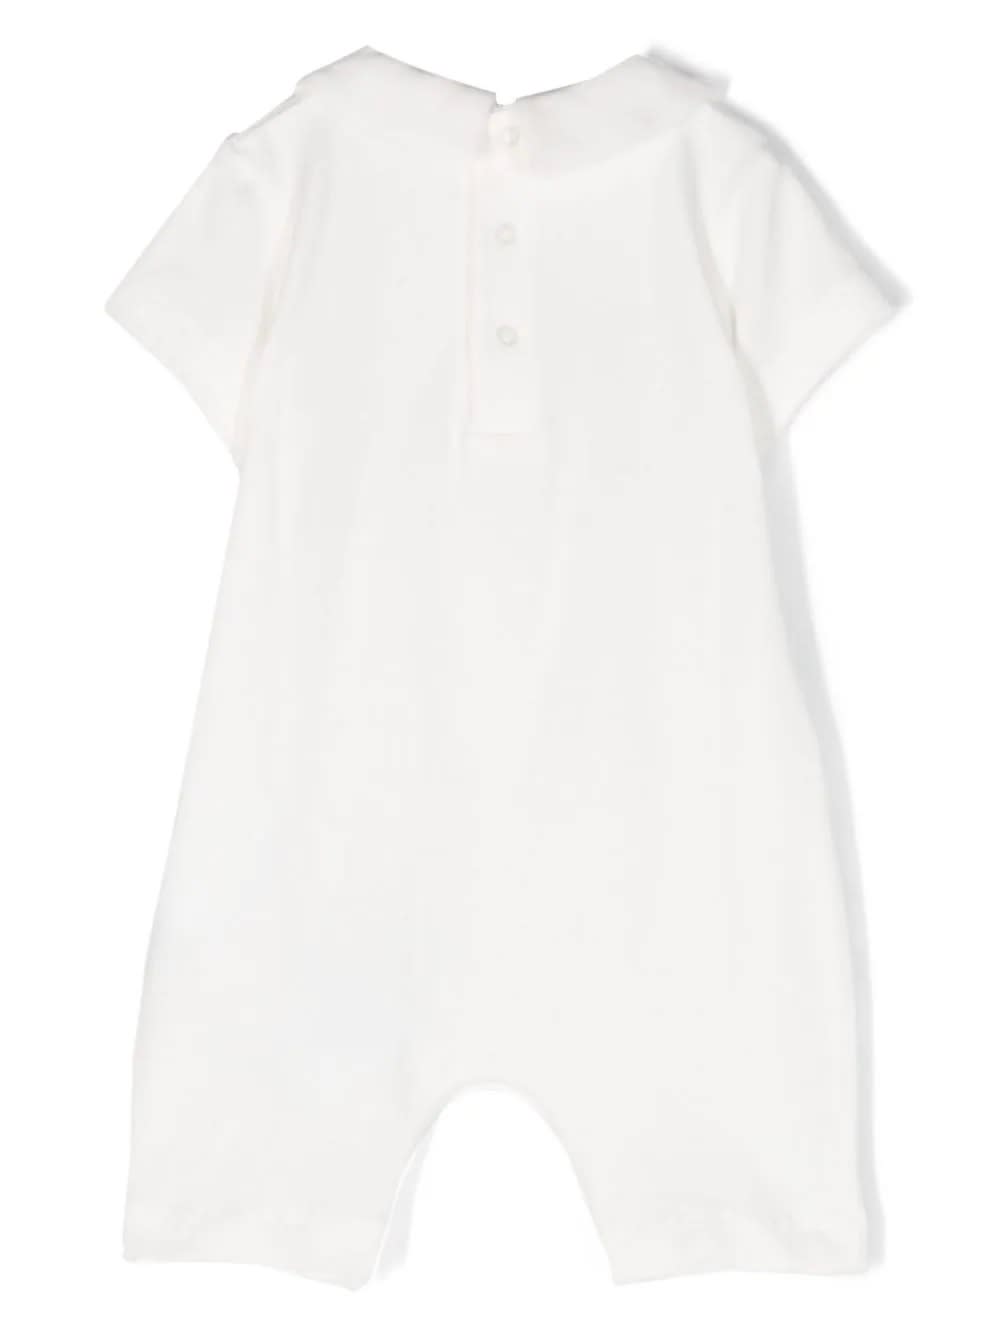 Shop Moschino Teddy Bear With Duck Playsuit In White